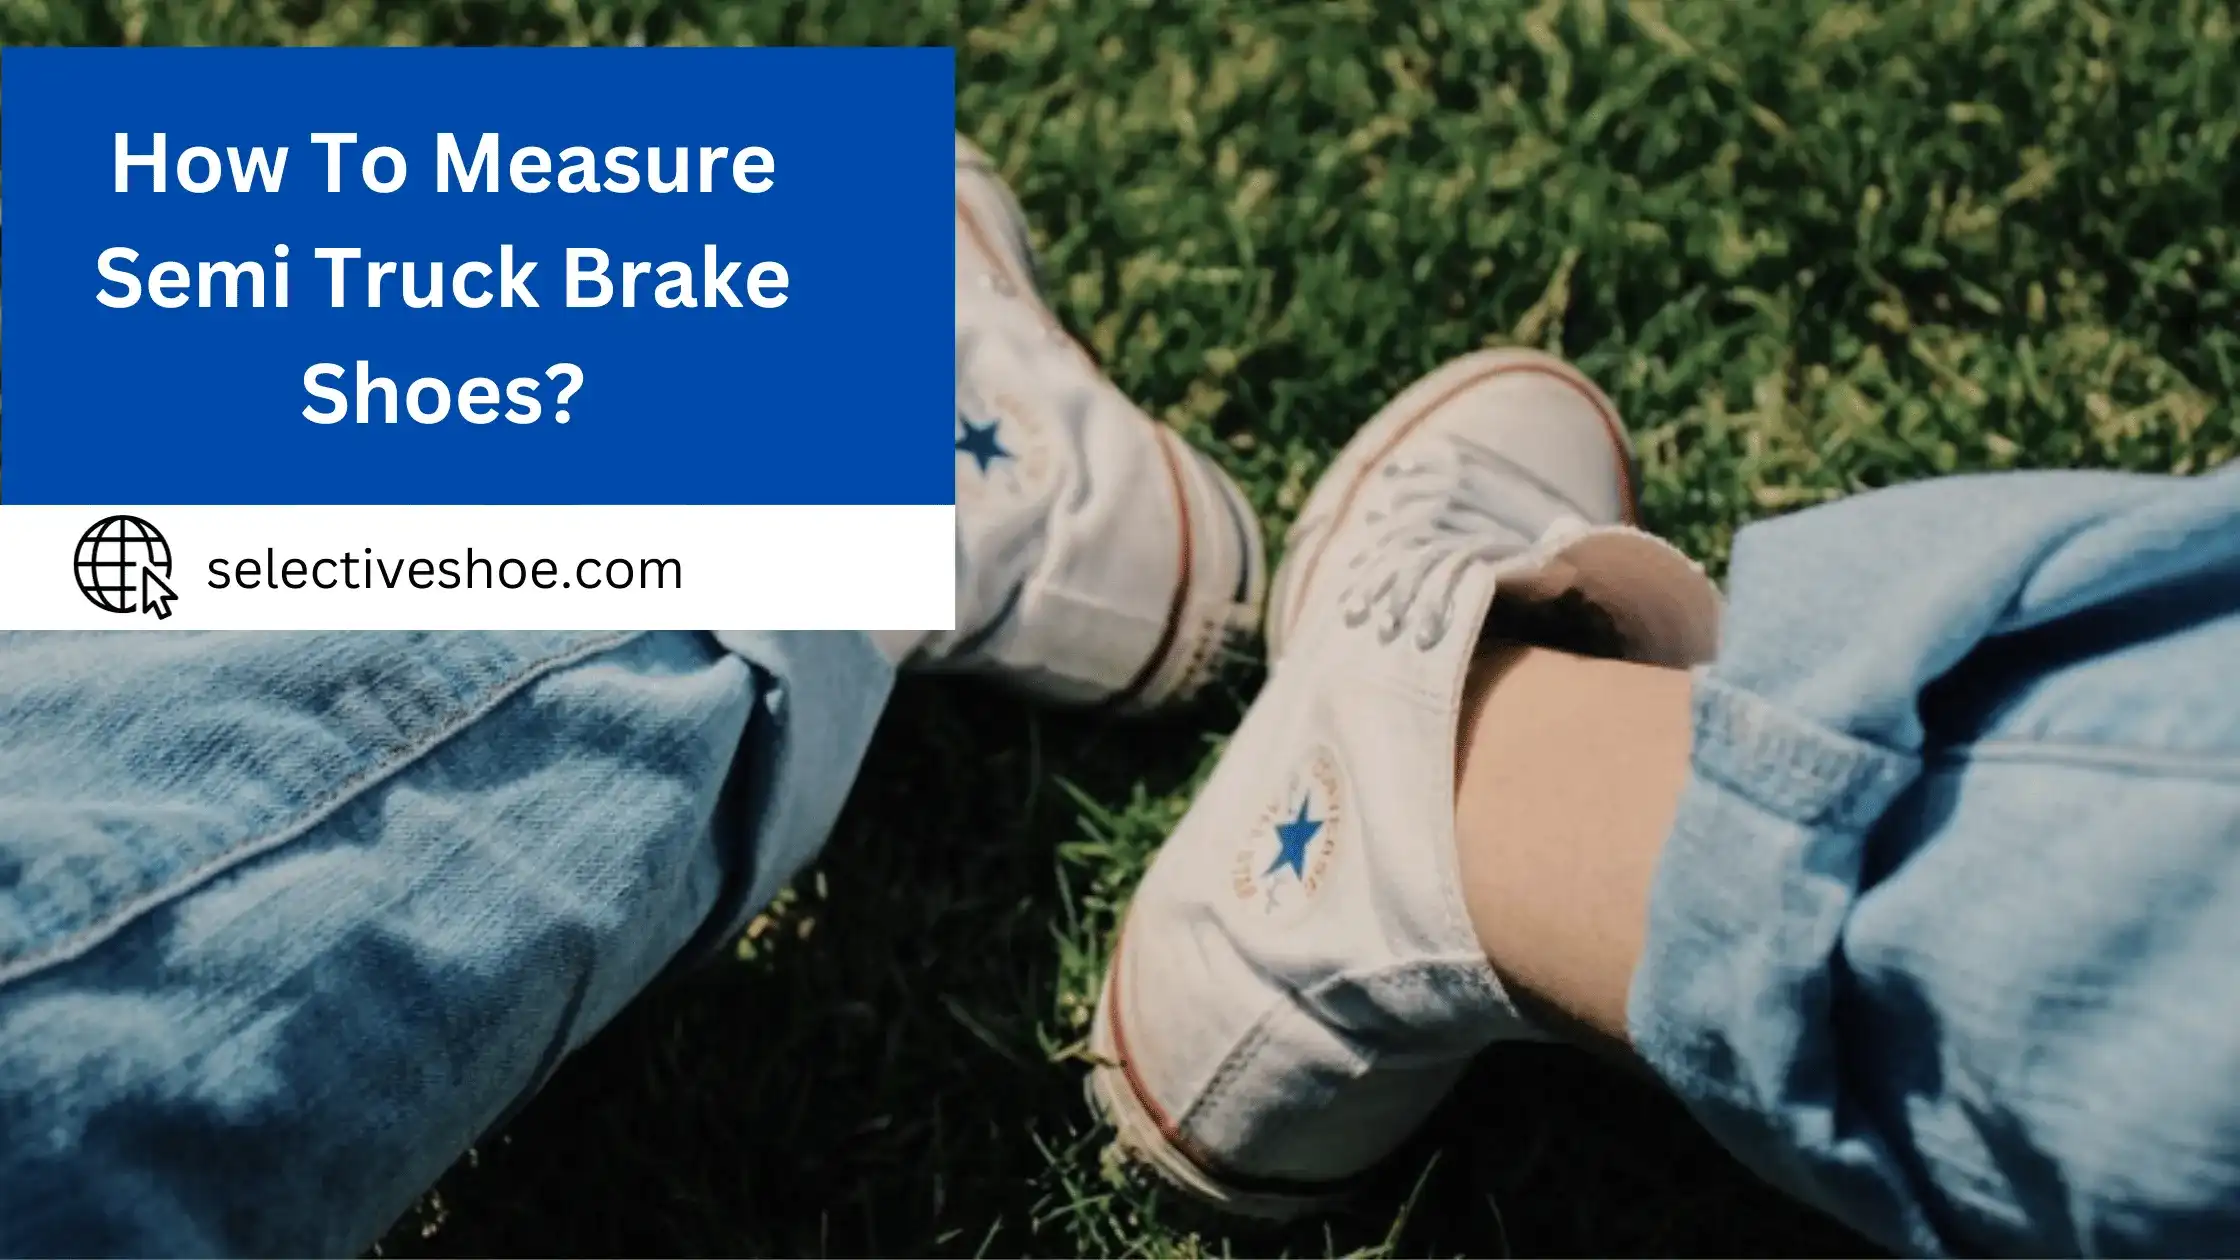 How To Measure Semi Truck Brake Shoes? Simple Guide